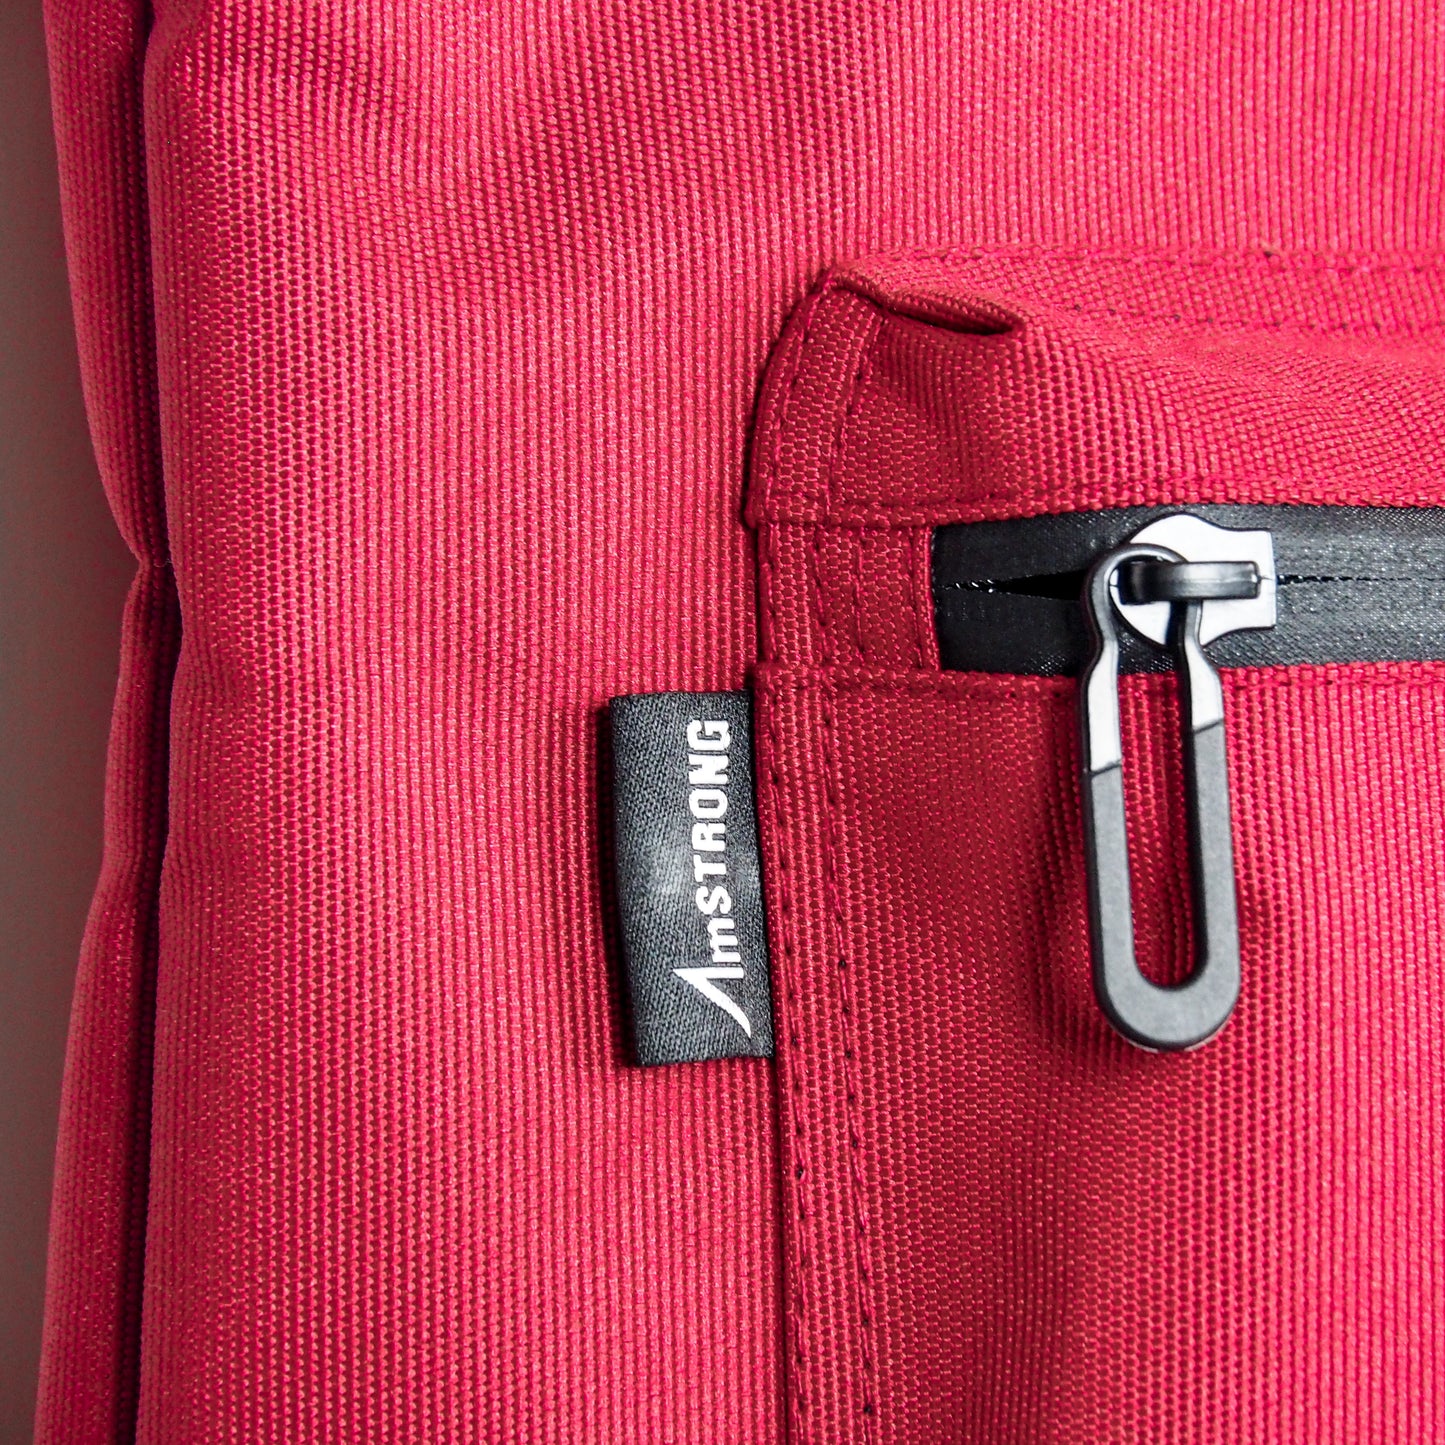 AmSTRONG woven label and waterproof zip on red fabric